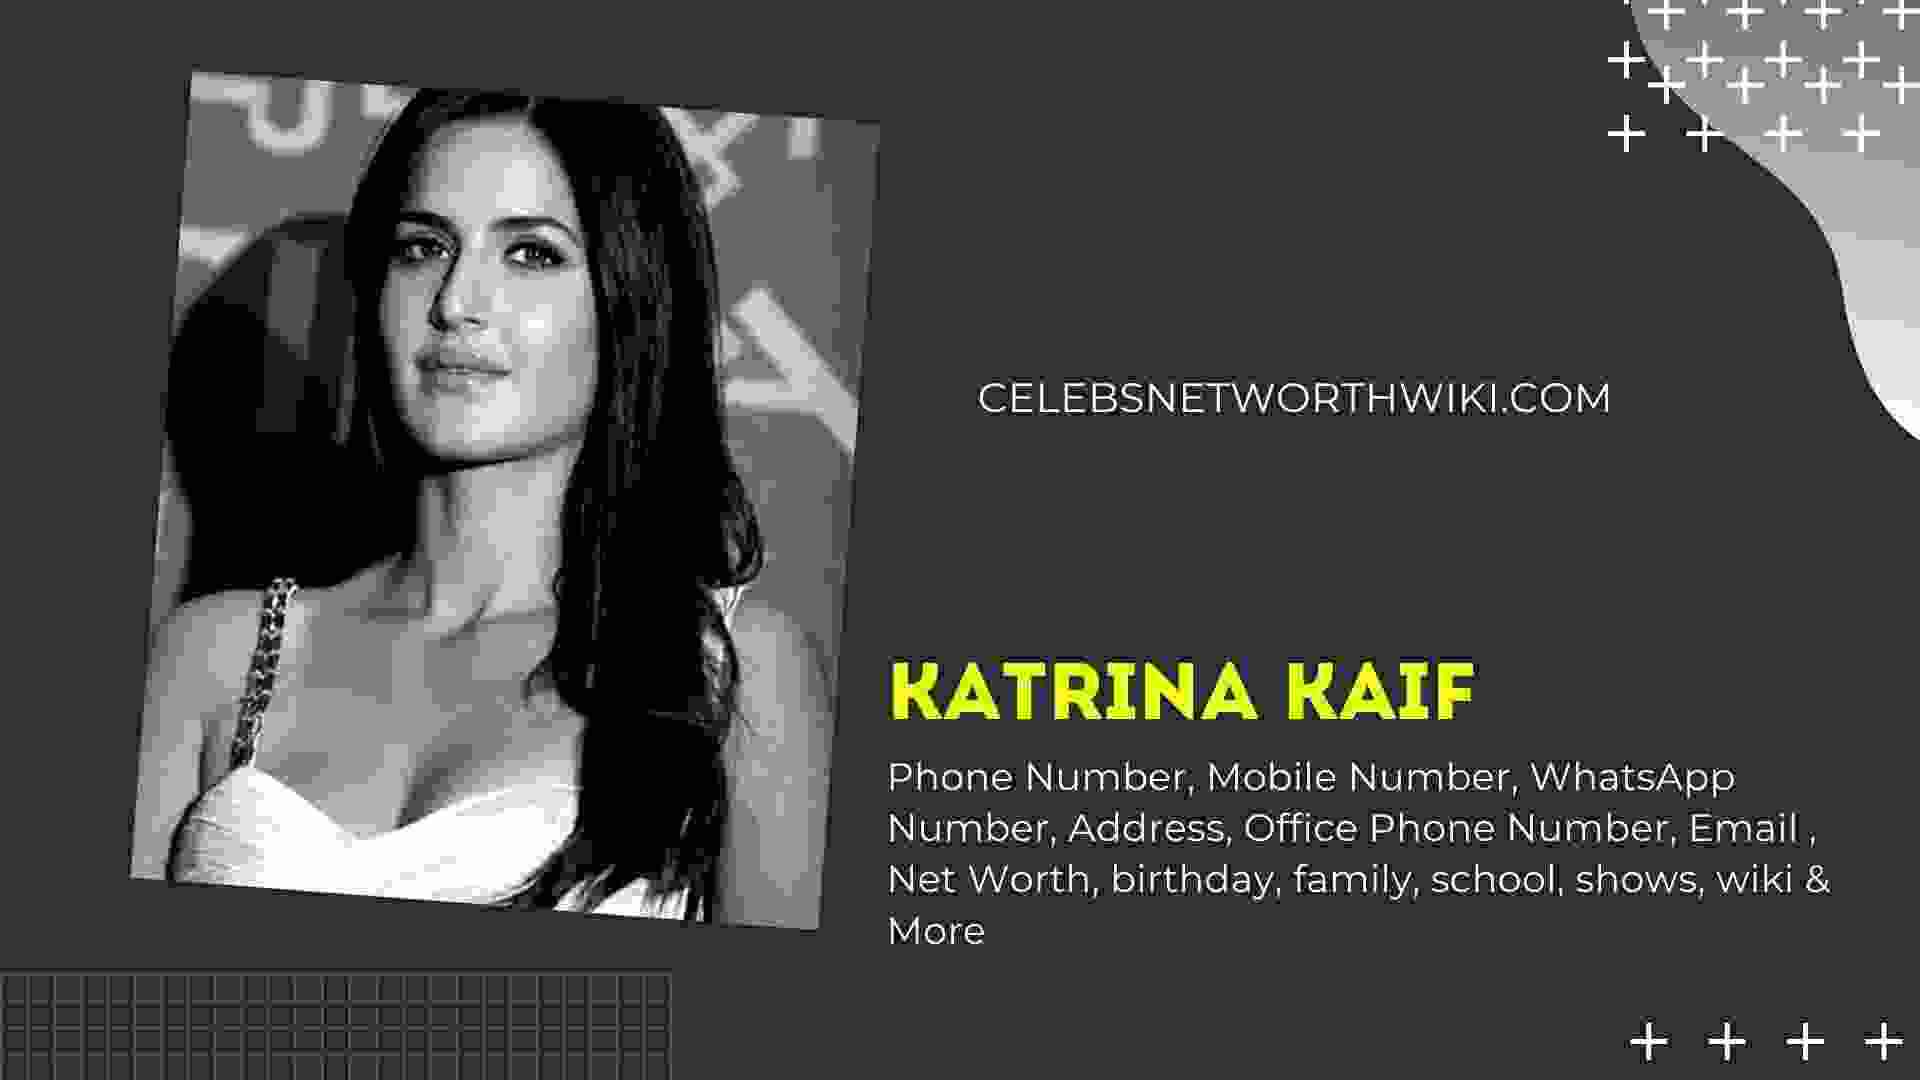 Katrina Kaif Phone Number Whatsapp Number Contact Number Office Phone Number Celebs Networth Wiki She loves her privacy very much. katrina kaif phone number whatsapp